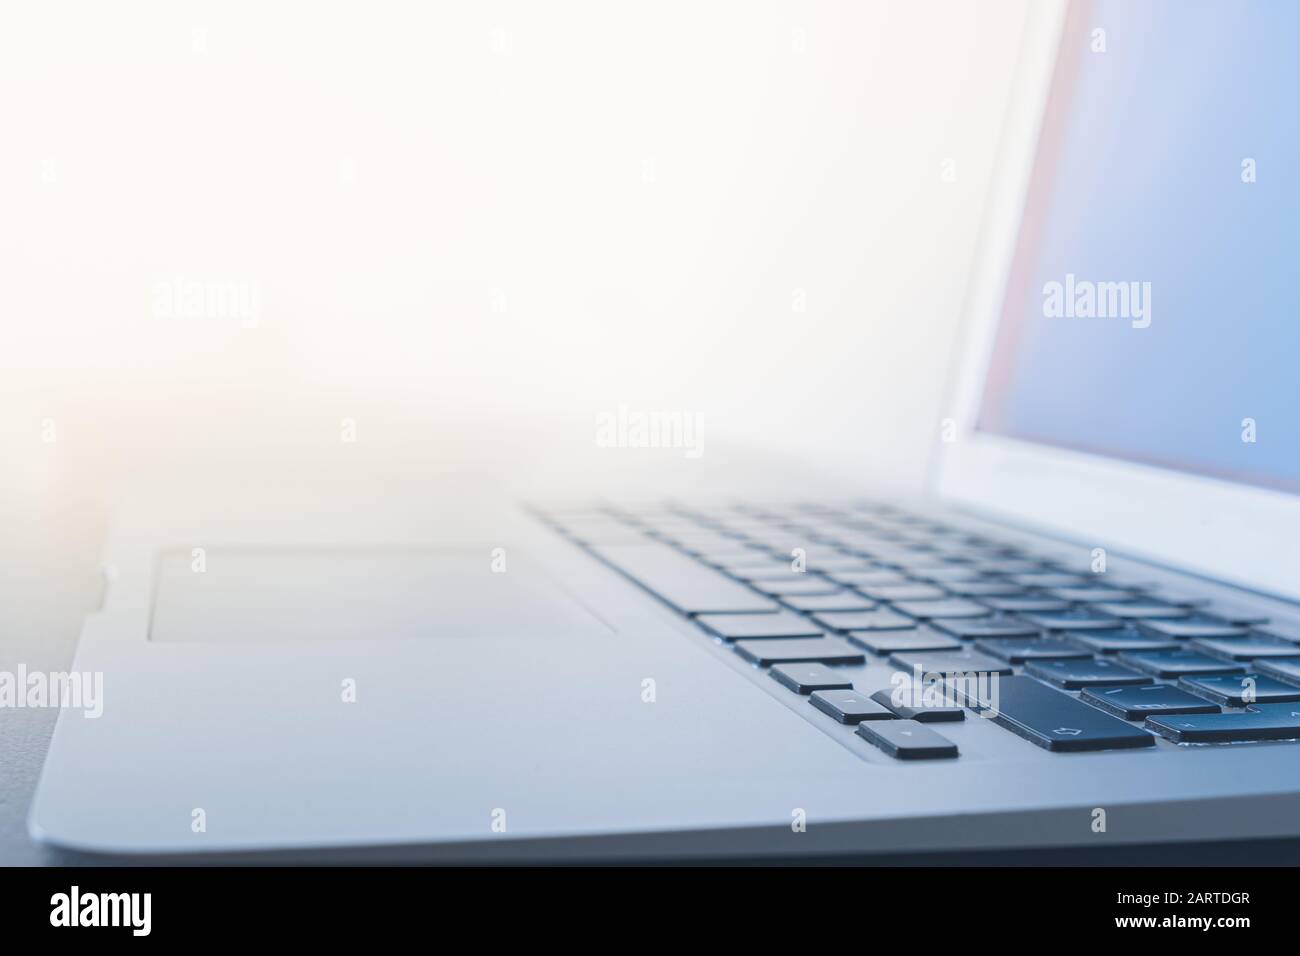 Surface of a portable computer against the bright light. Concept of well lit and bright workplace, using computer at daylight Stock Photo